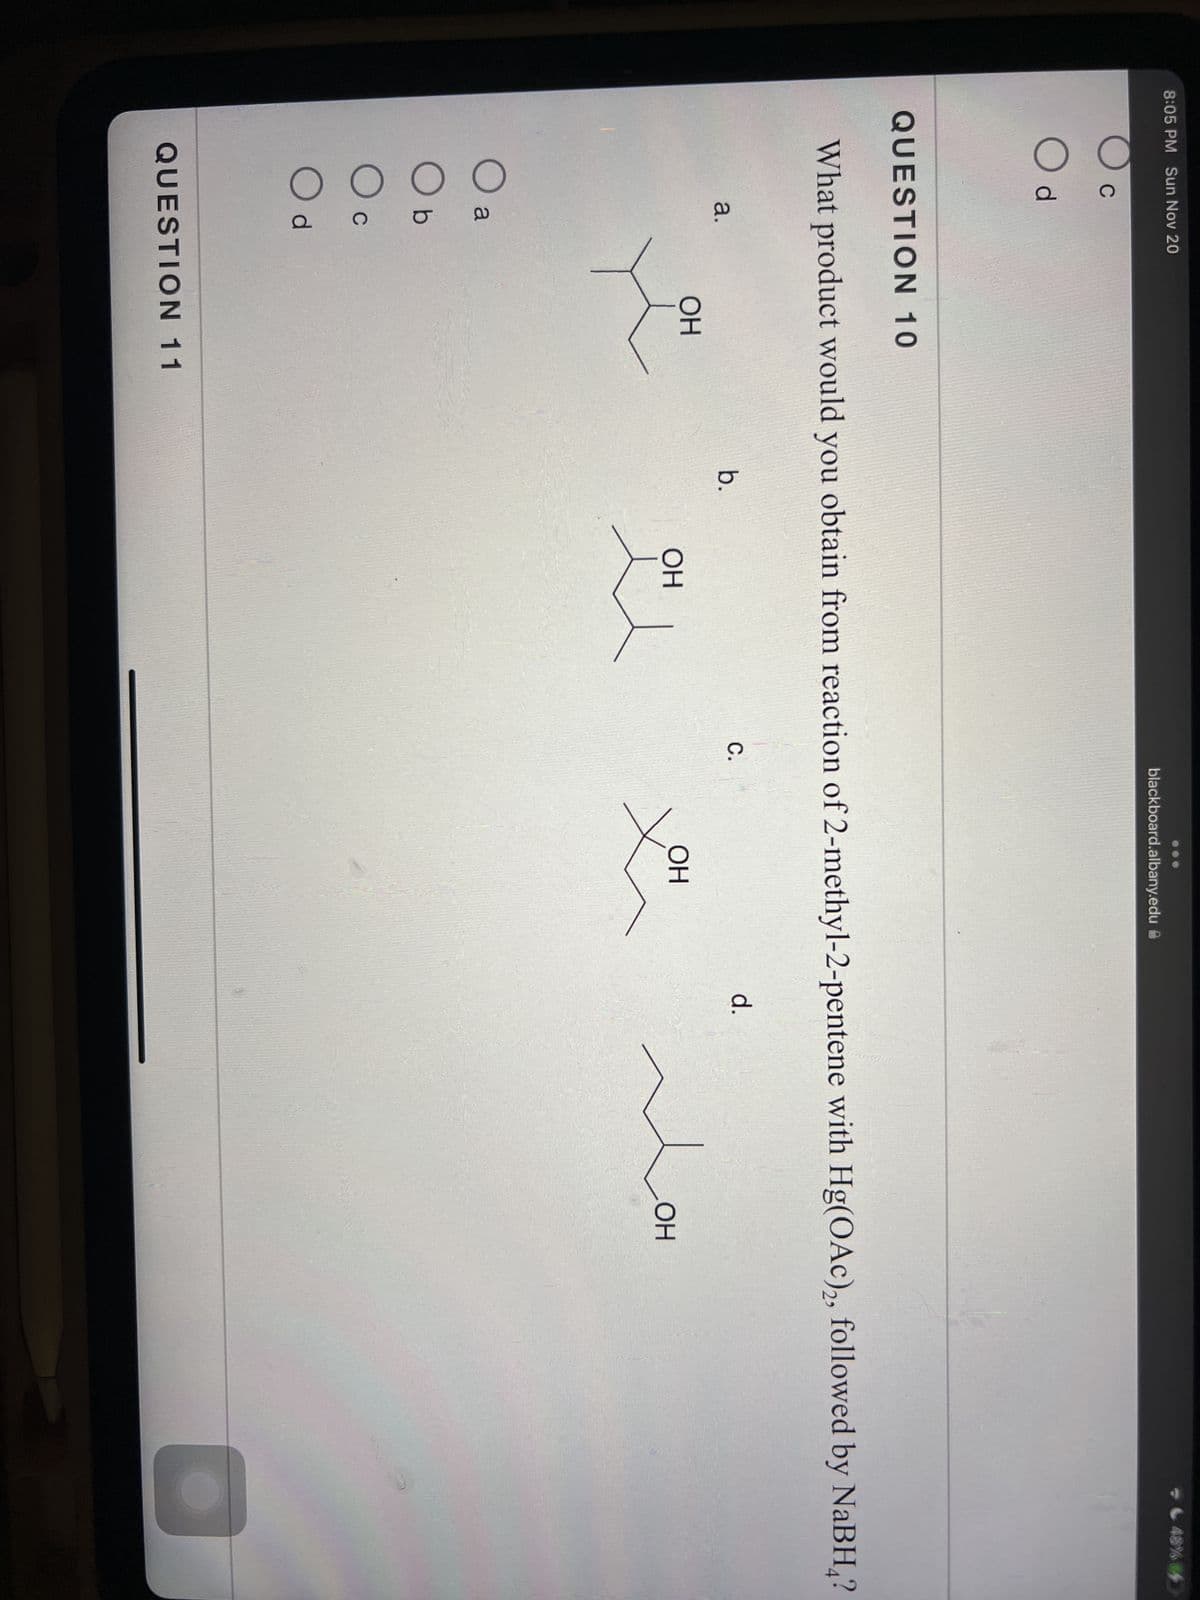 8:05 PM Sun Nov 20
C
O d
QUESTION 10
O
What product would you obtain from reaction of 2-methyl-2-pentene with Hg(OAc)2, followed by NaBH?
a.
a
Ob
Oc
C
Od
ОН
QUESTION 11
b.
OH
blackboard.albany.edu
C.
OH
d.
M
48% 4
OH